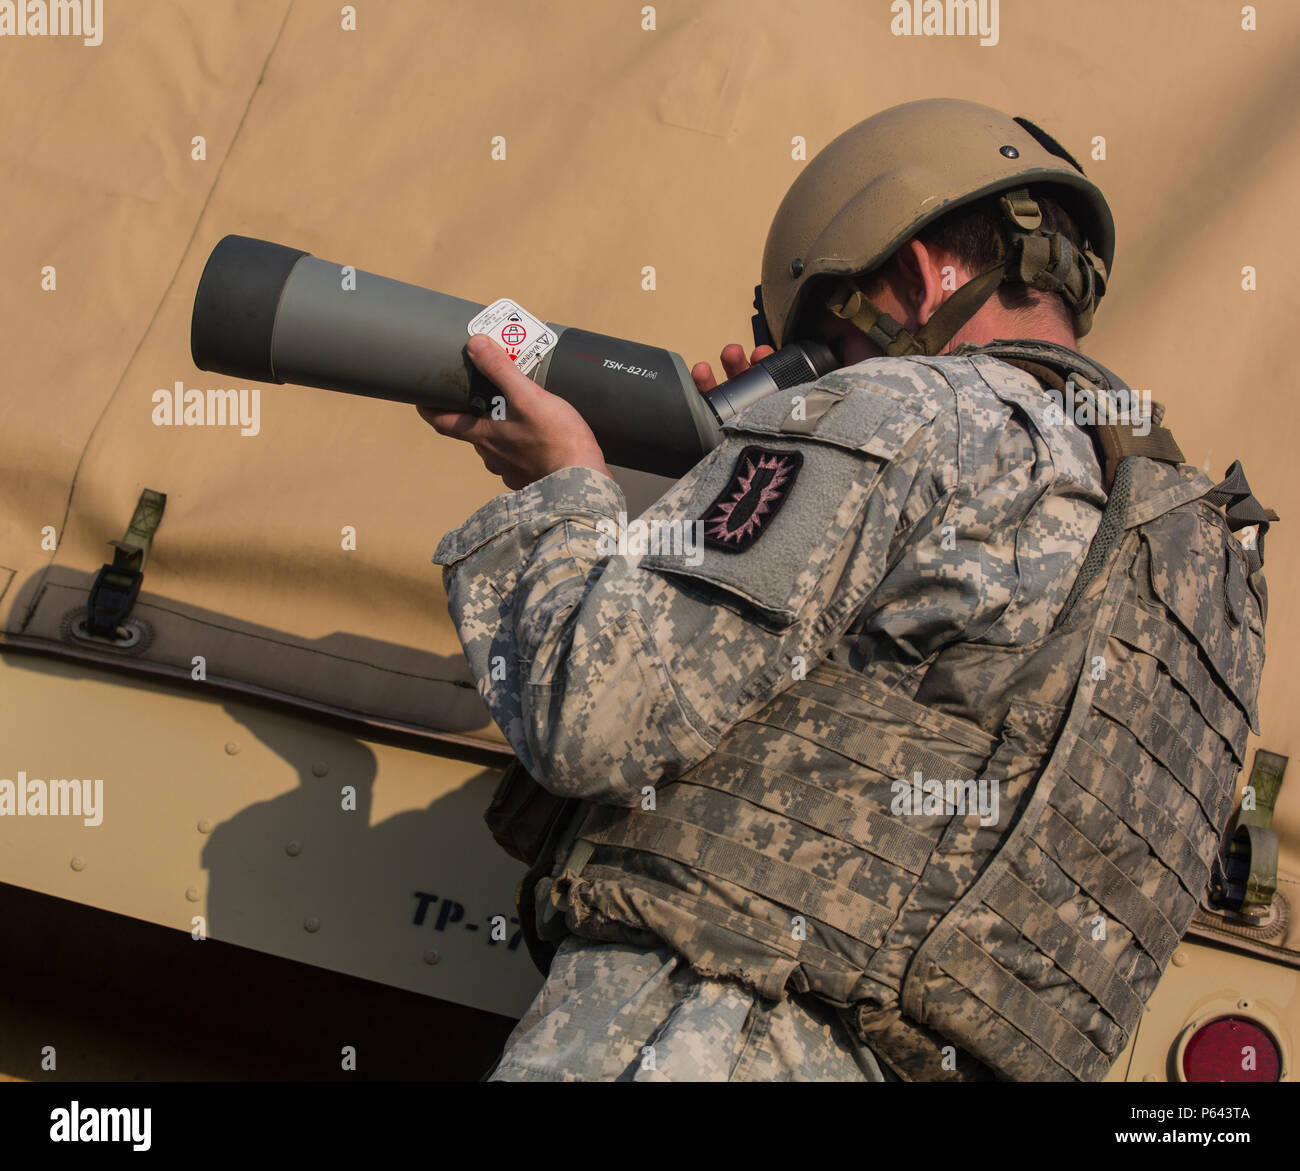 U.S. Army Staff Sgt. Jesse Harris assigned to the 49th Ordnance Company (EOD), 184th Ordnance Battalion (EOD), looks through a spotting scope during the 52nd  Ordnance Group (EOD) Team of the Year 2016 competition at Wendell H. Ford Regional Training Center, Greenville, Ky., April 27, 2016. The weeklong competition test teams, consisting of (2 to 3) EOD Technicians, in various scenarios they may encounter in situations around the world, to determine the most physically, mentally, tactically, and technically fit team to represent their command in future competition. (U.S. Army Photo by Pfc. Aar Stock Photo